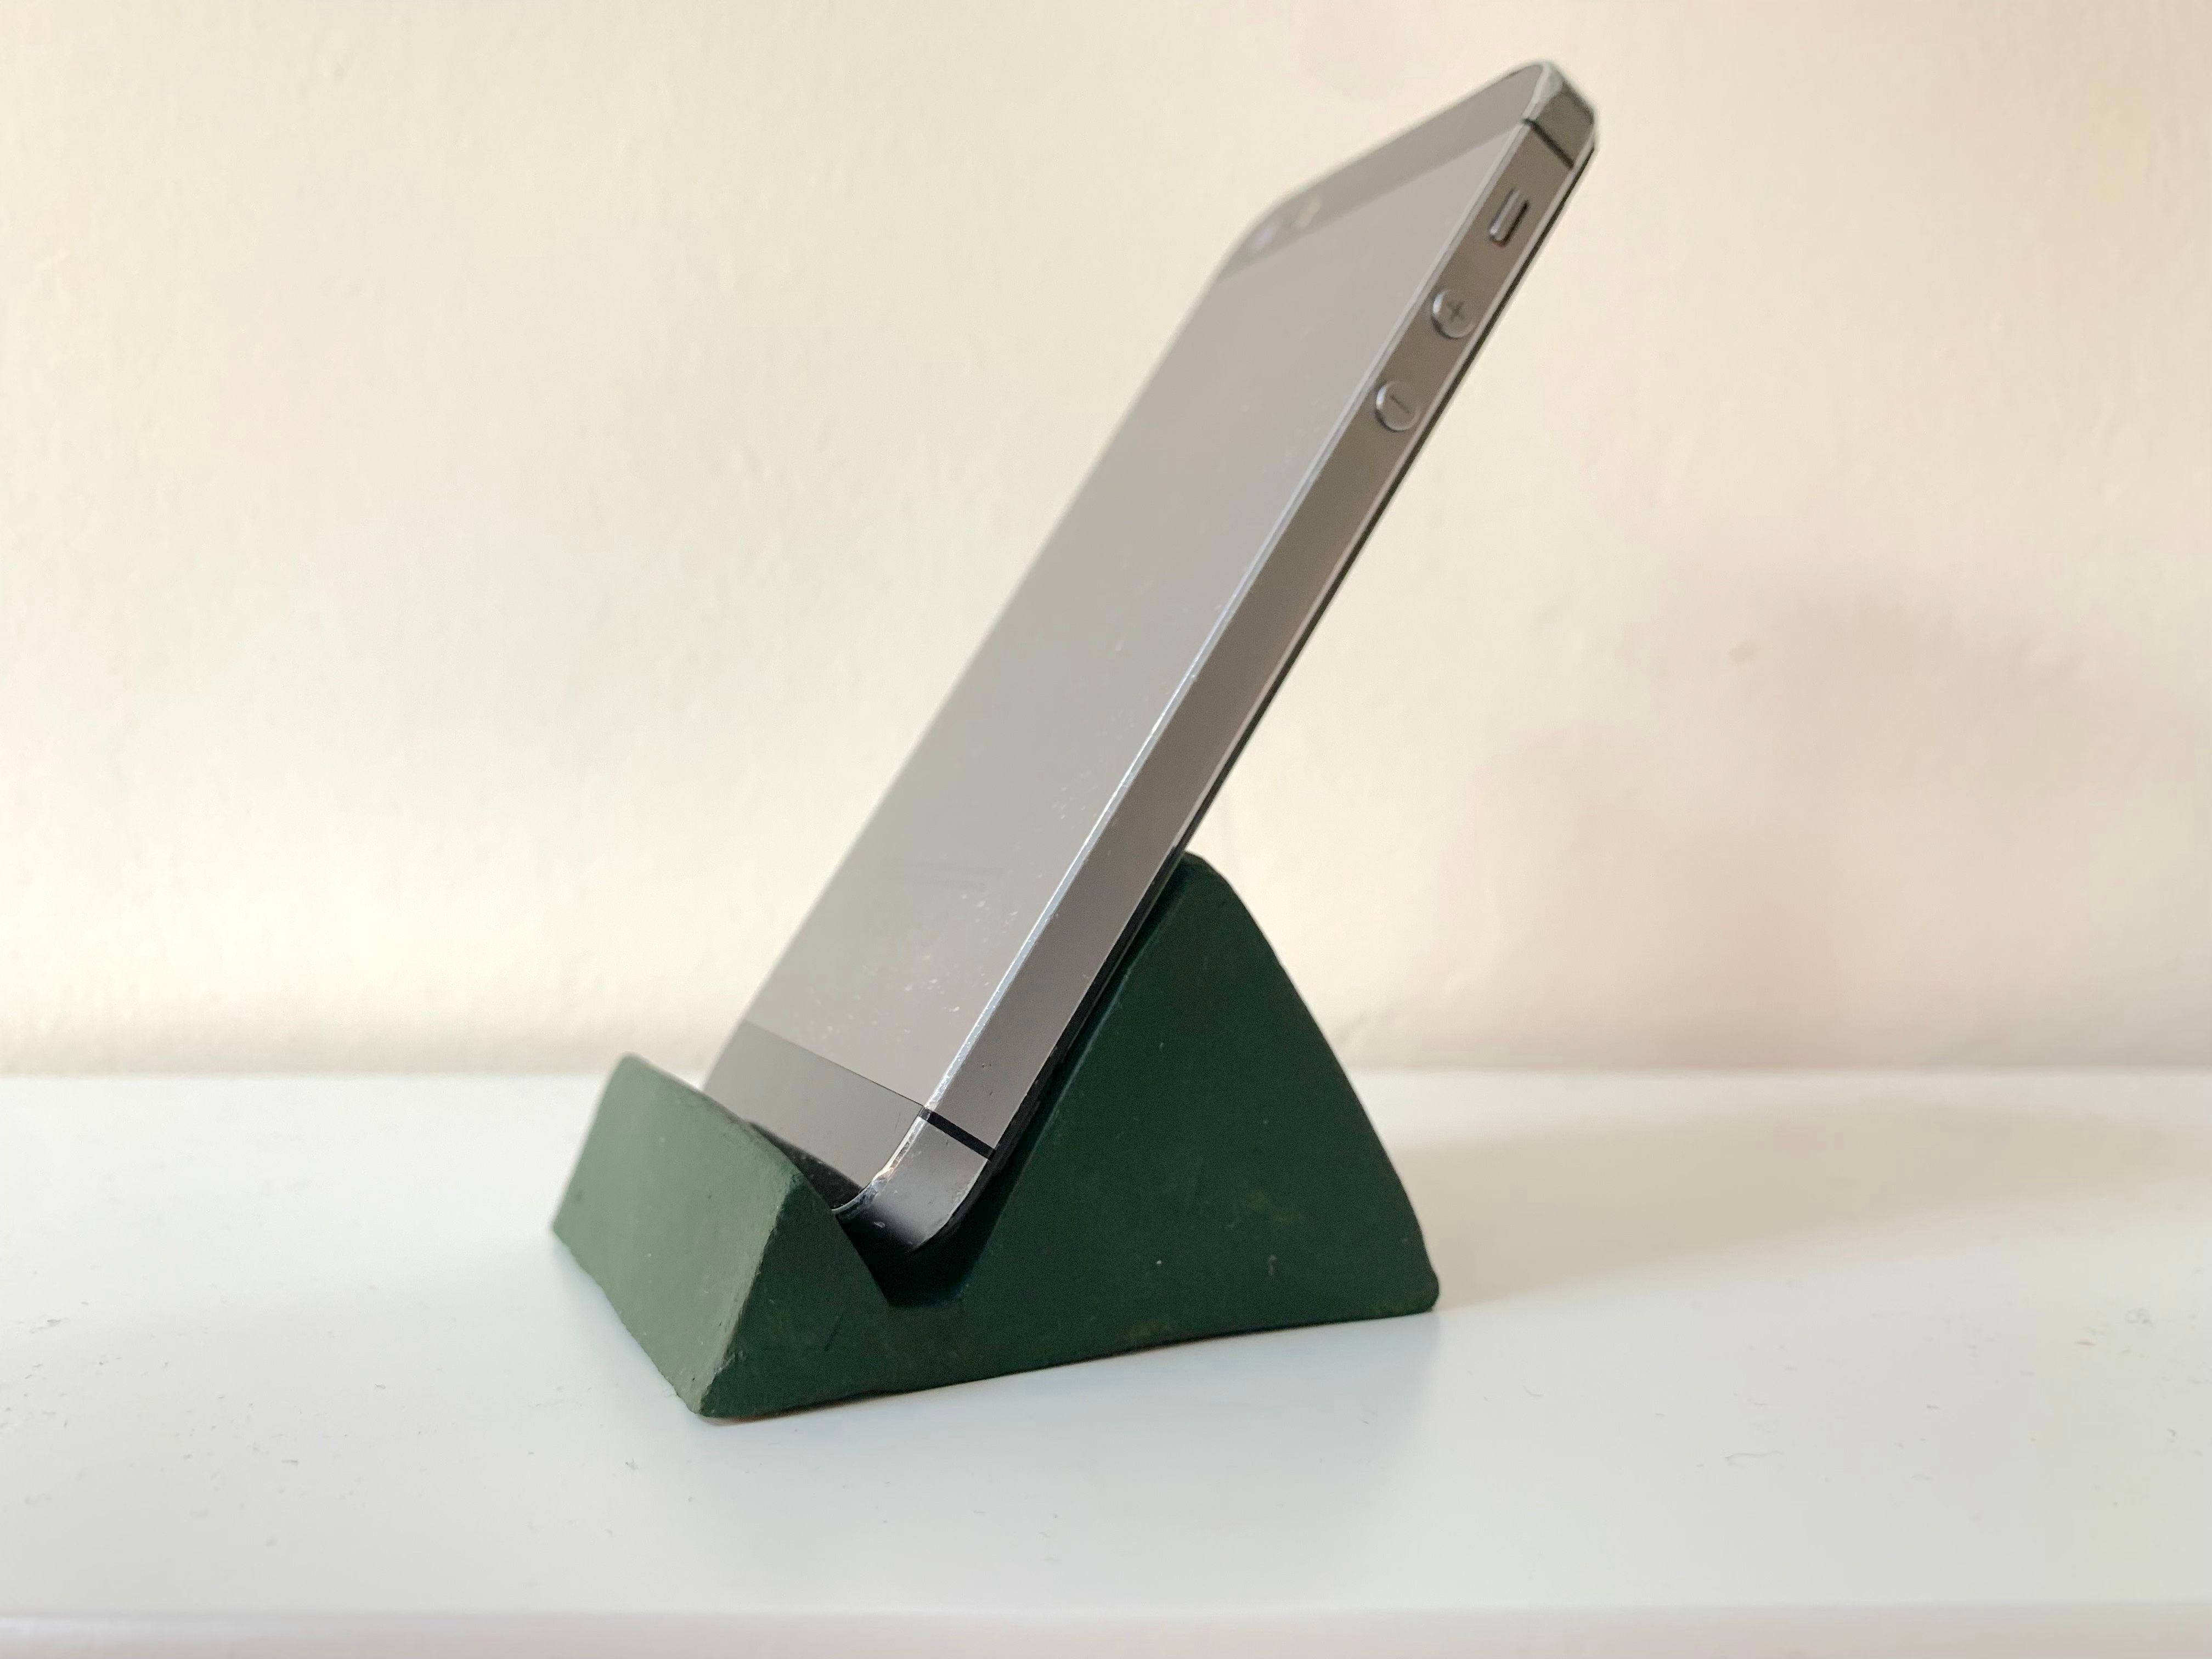 An iphone6s sitting in the finished clay phone stand painted green